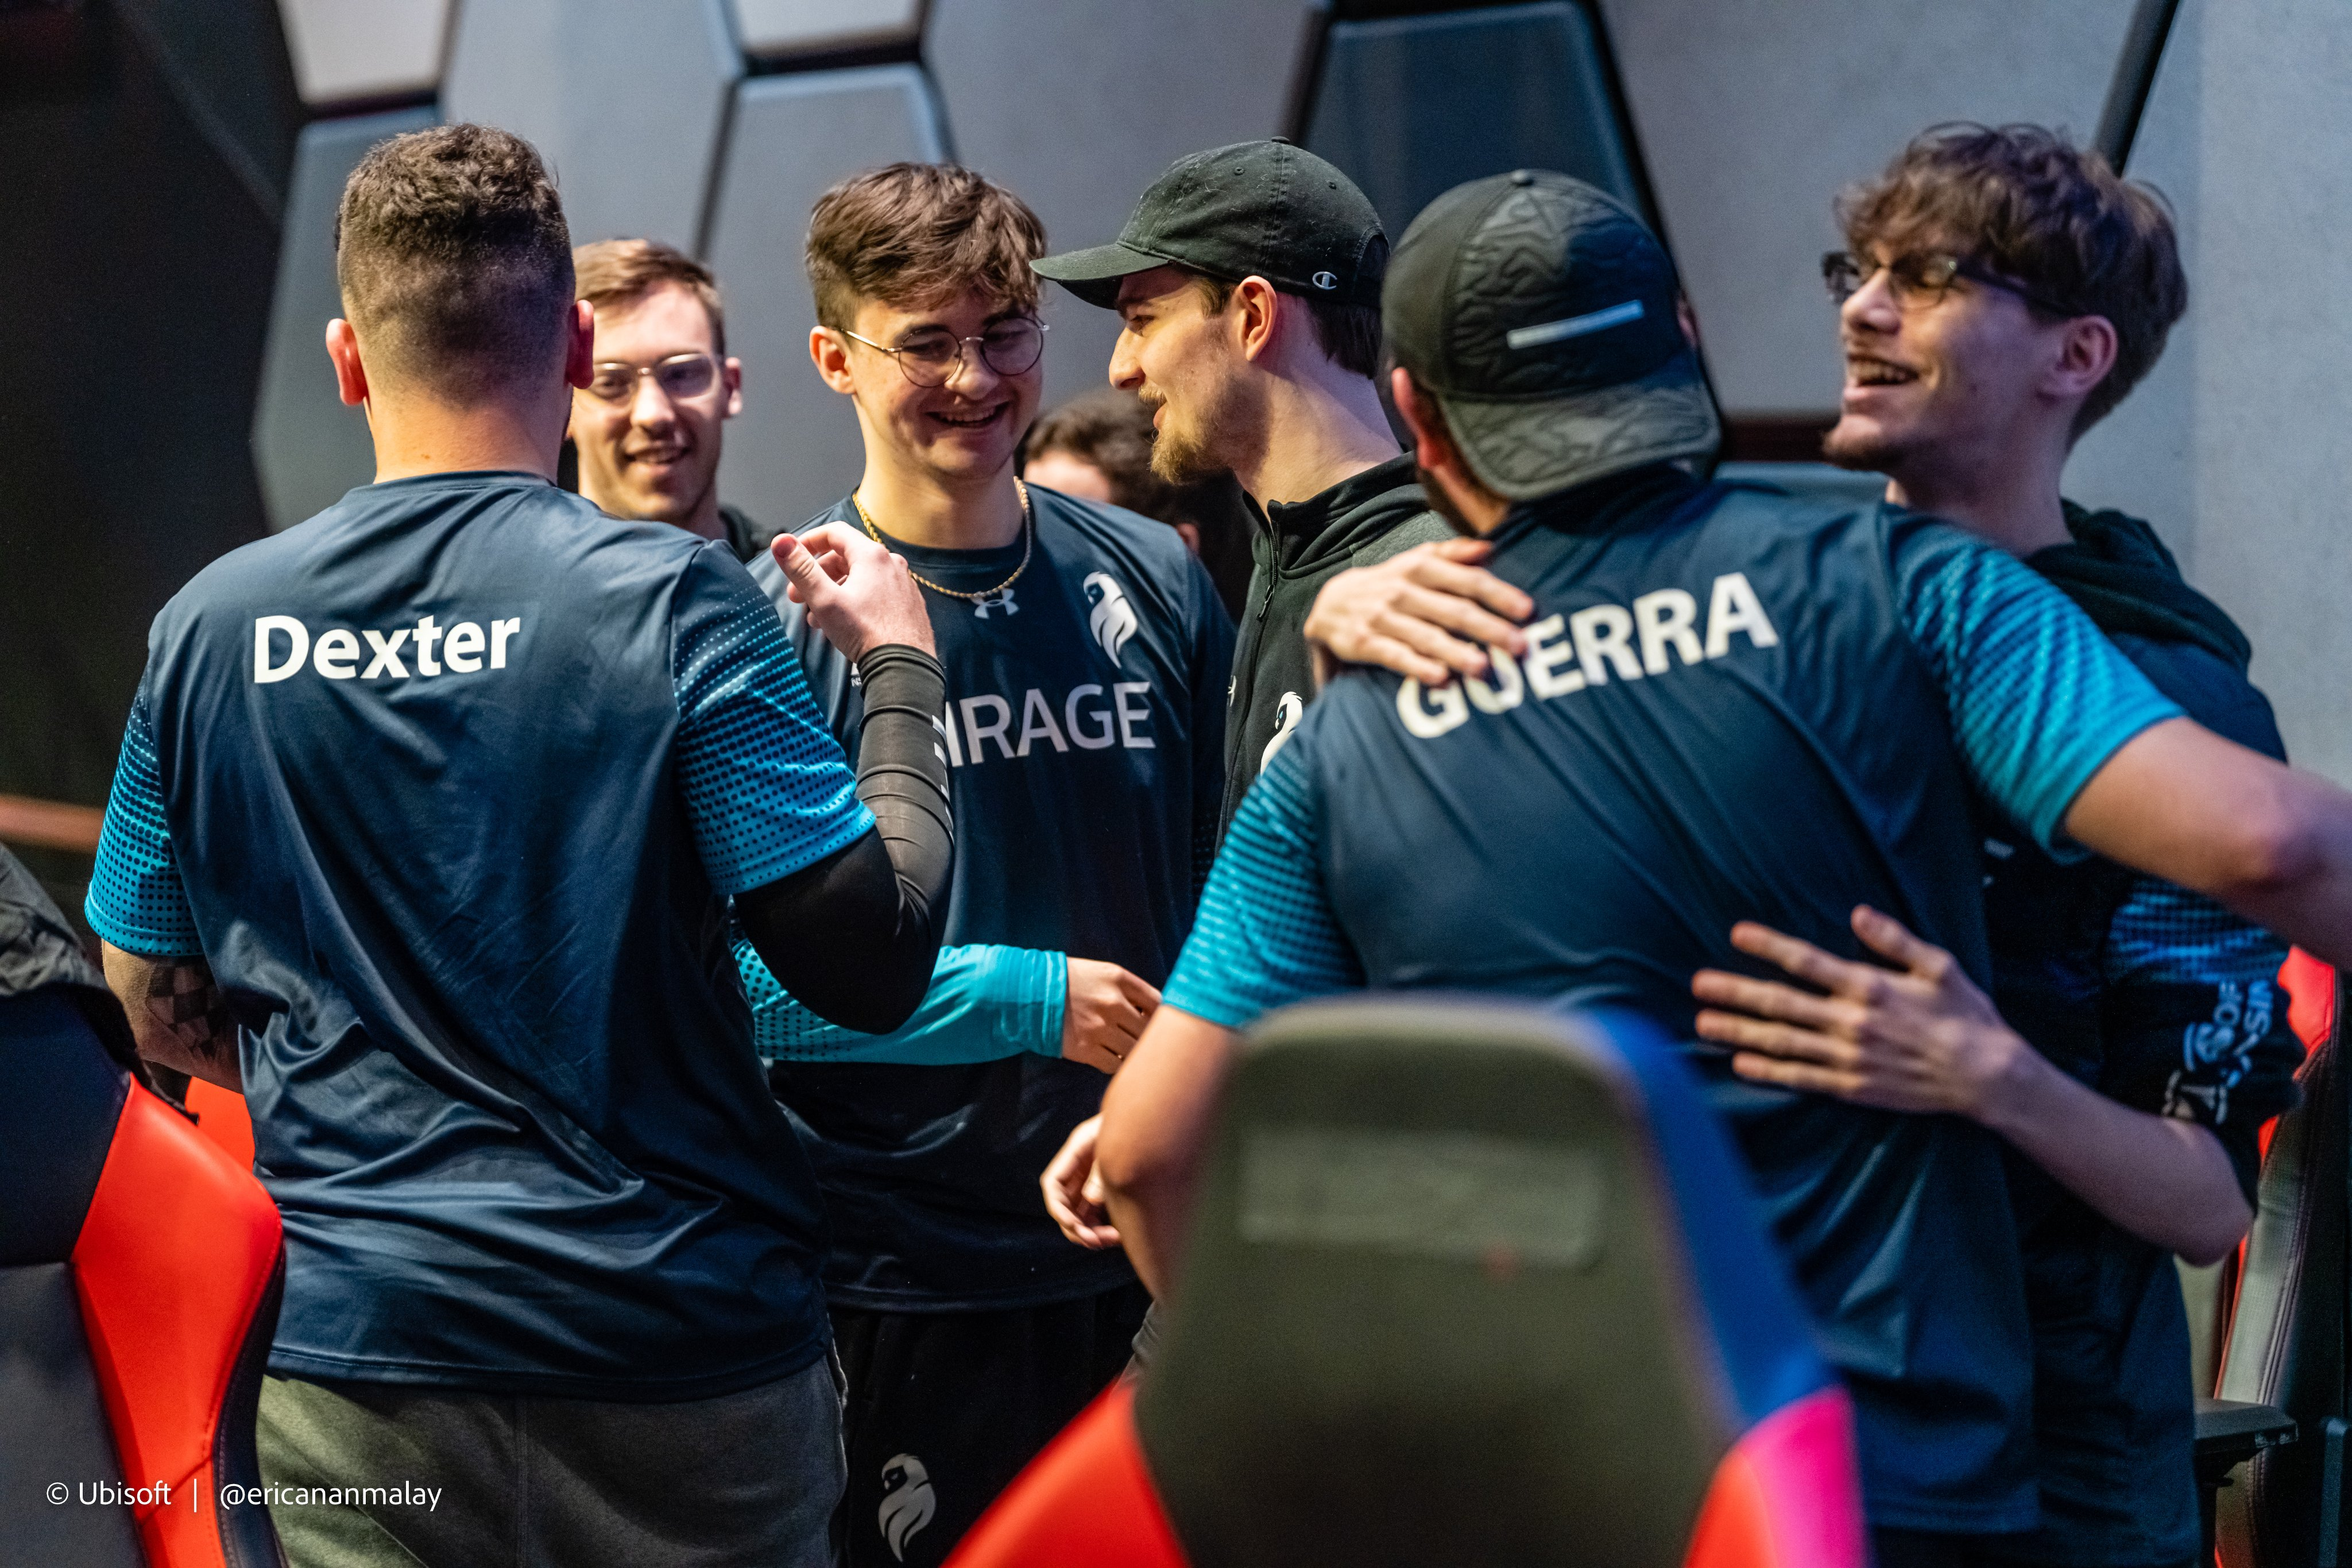 The R6 roster for Mirage celebrate in the booth together after a win